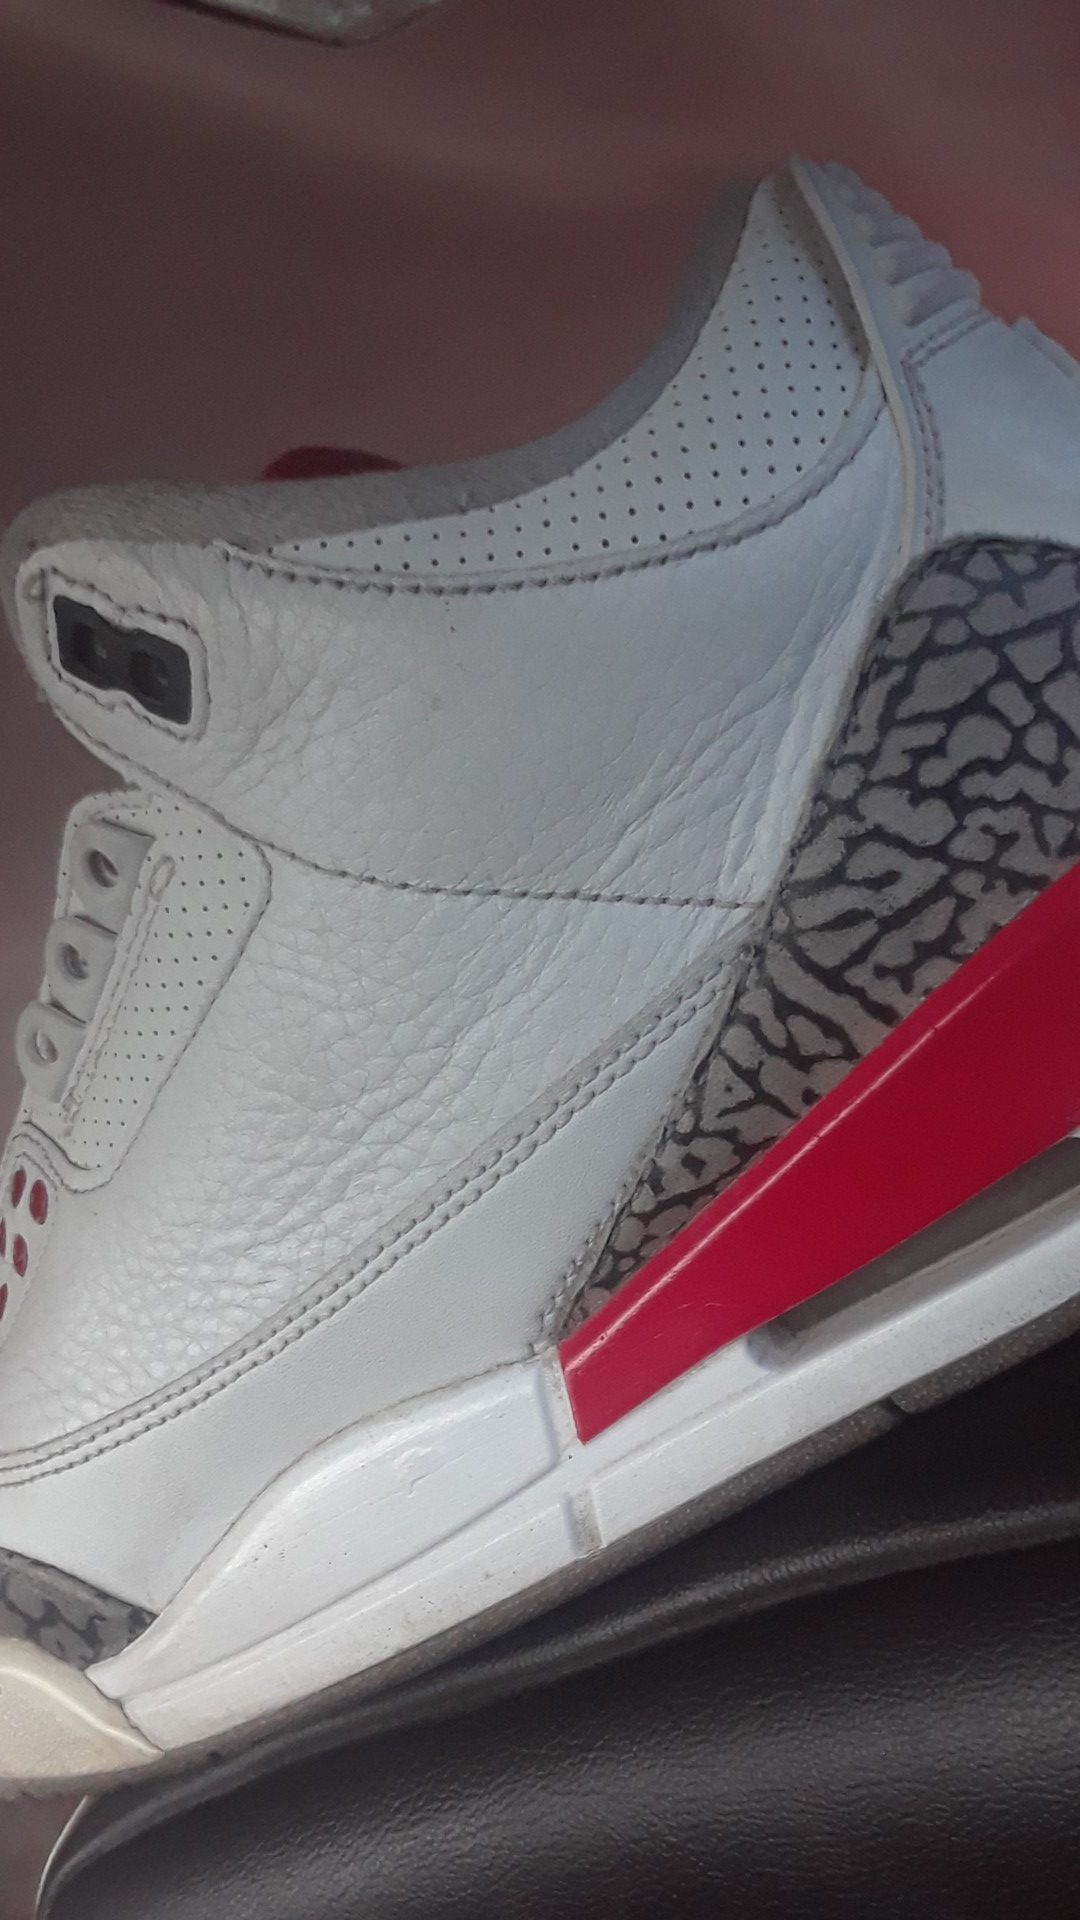 8 1/2 white and red Jordans